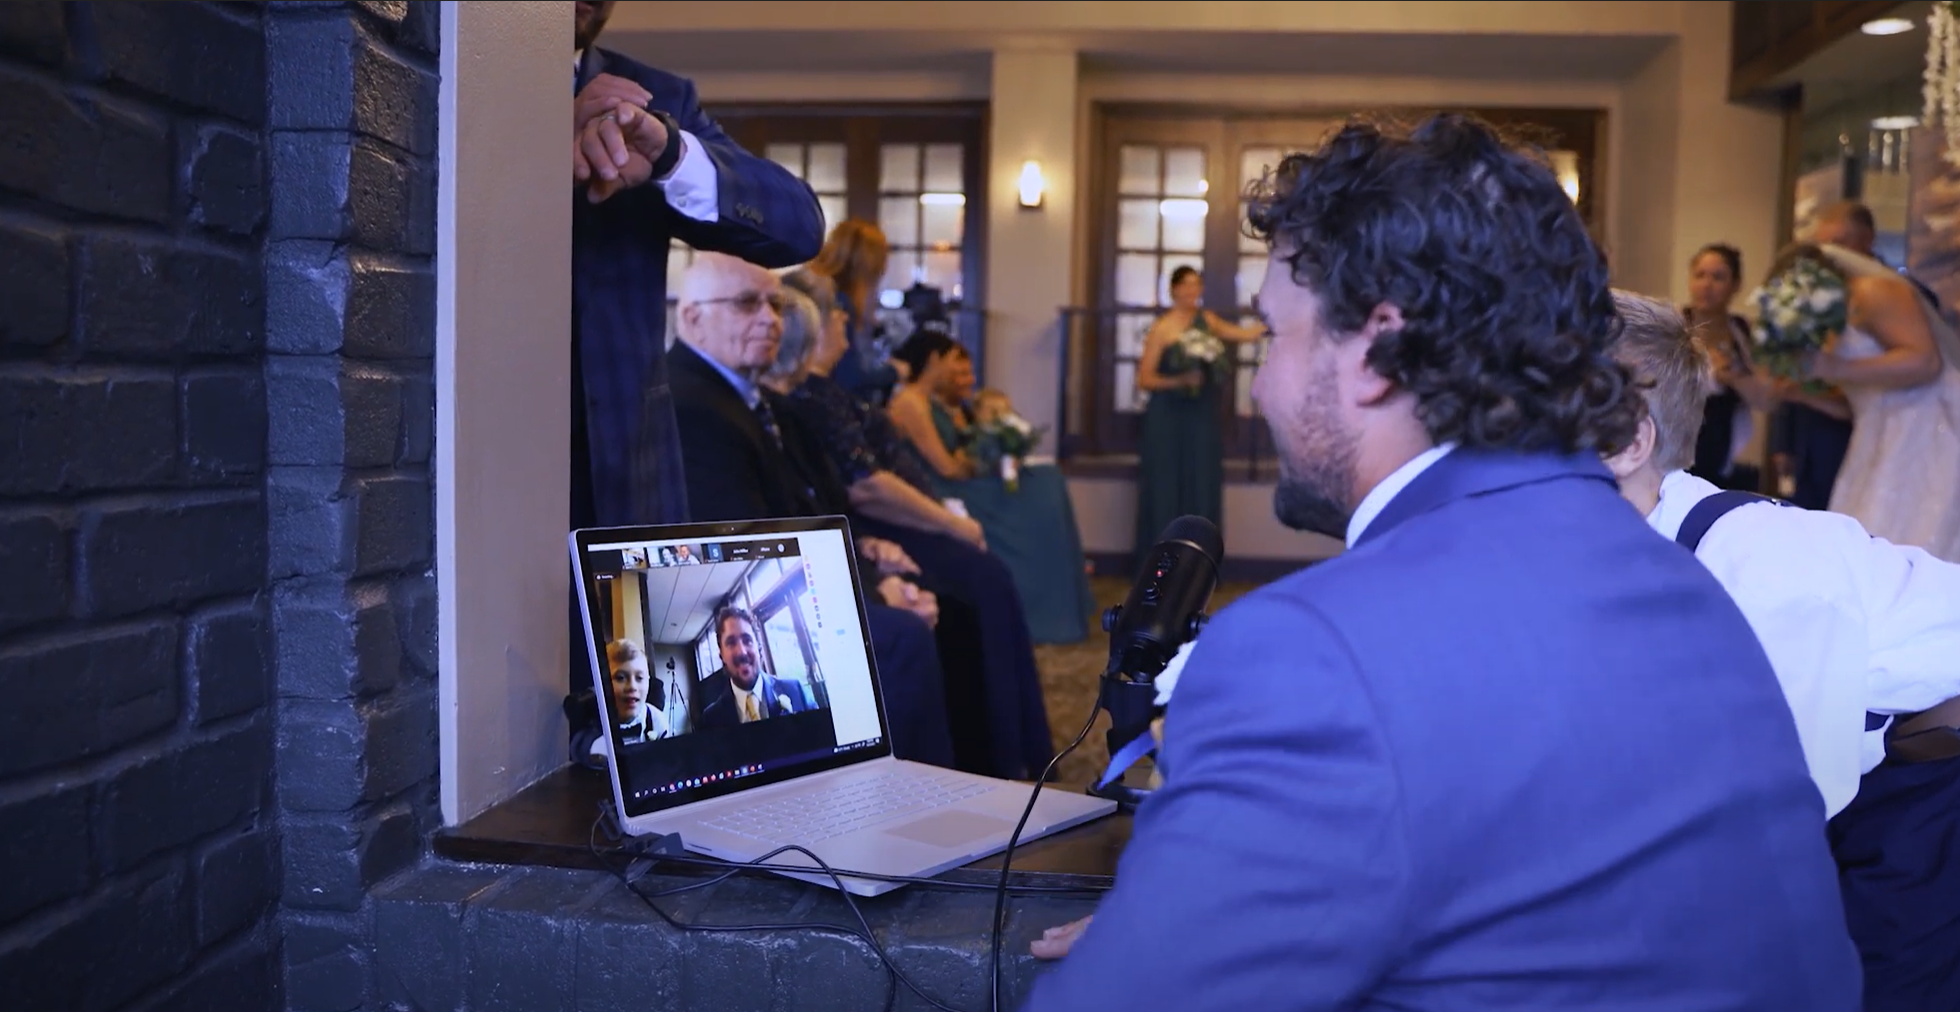 Wedding ceremony with skype during Covid-19